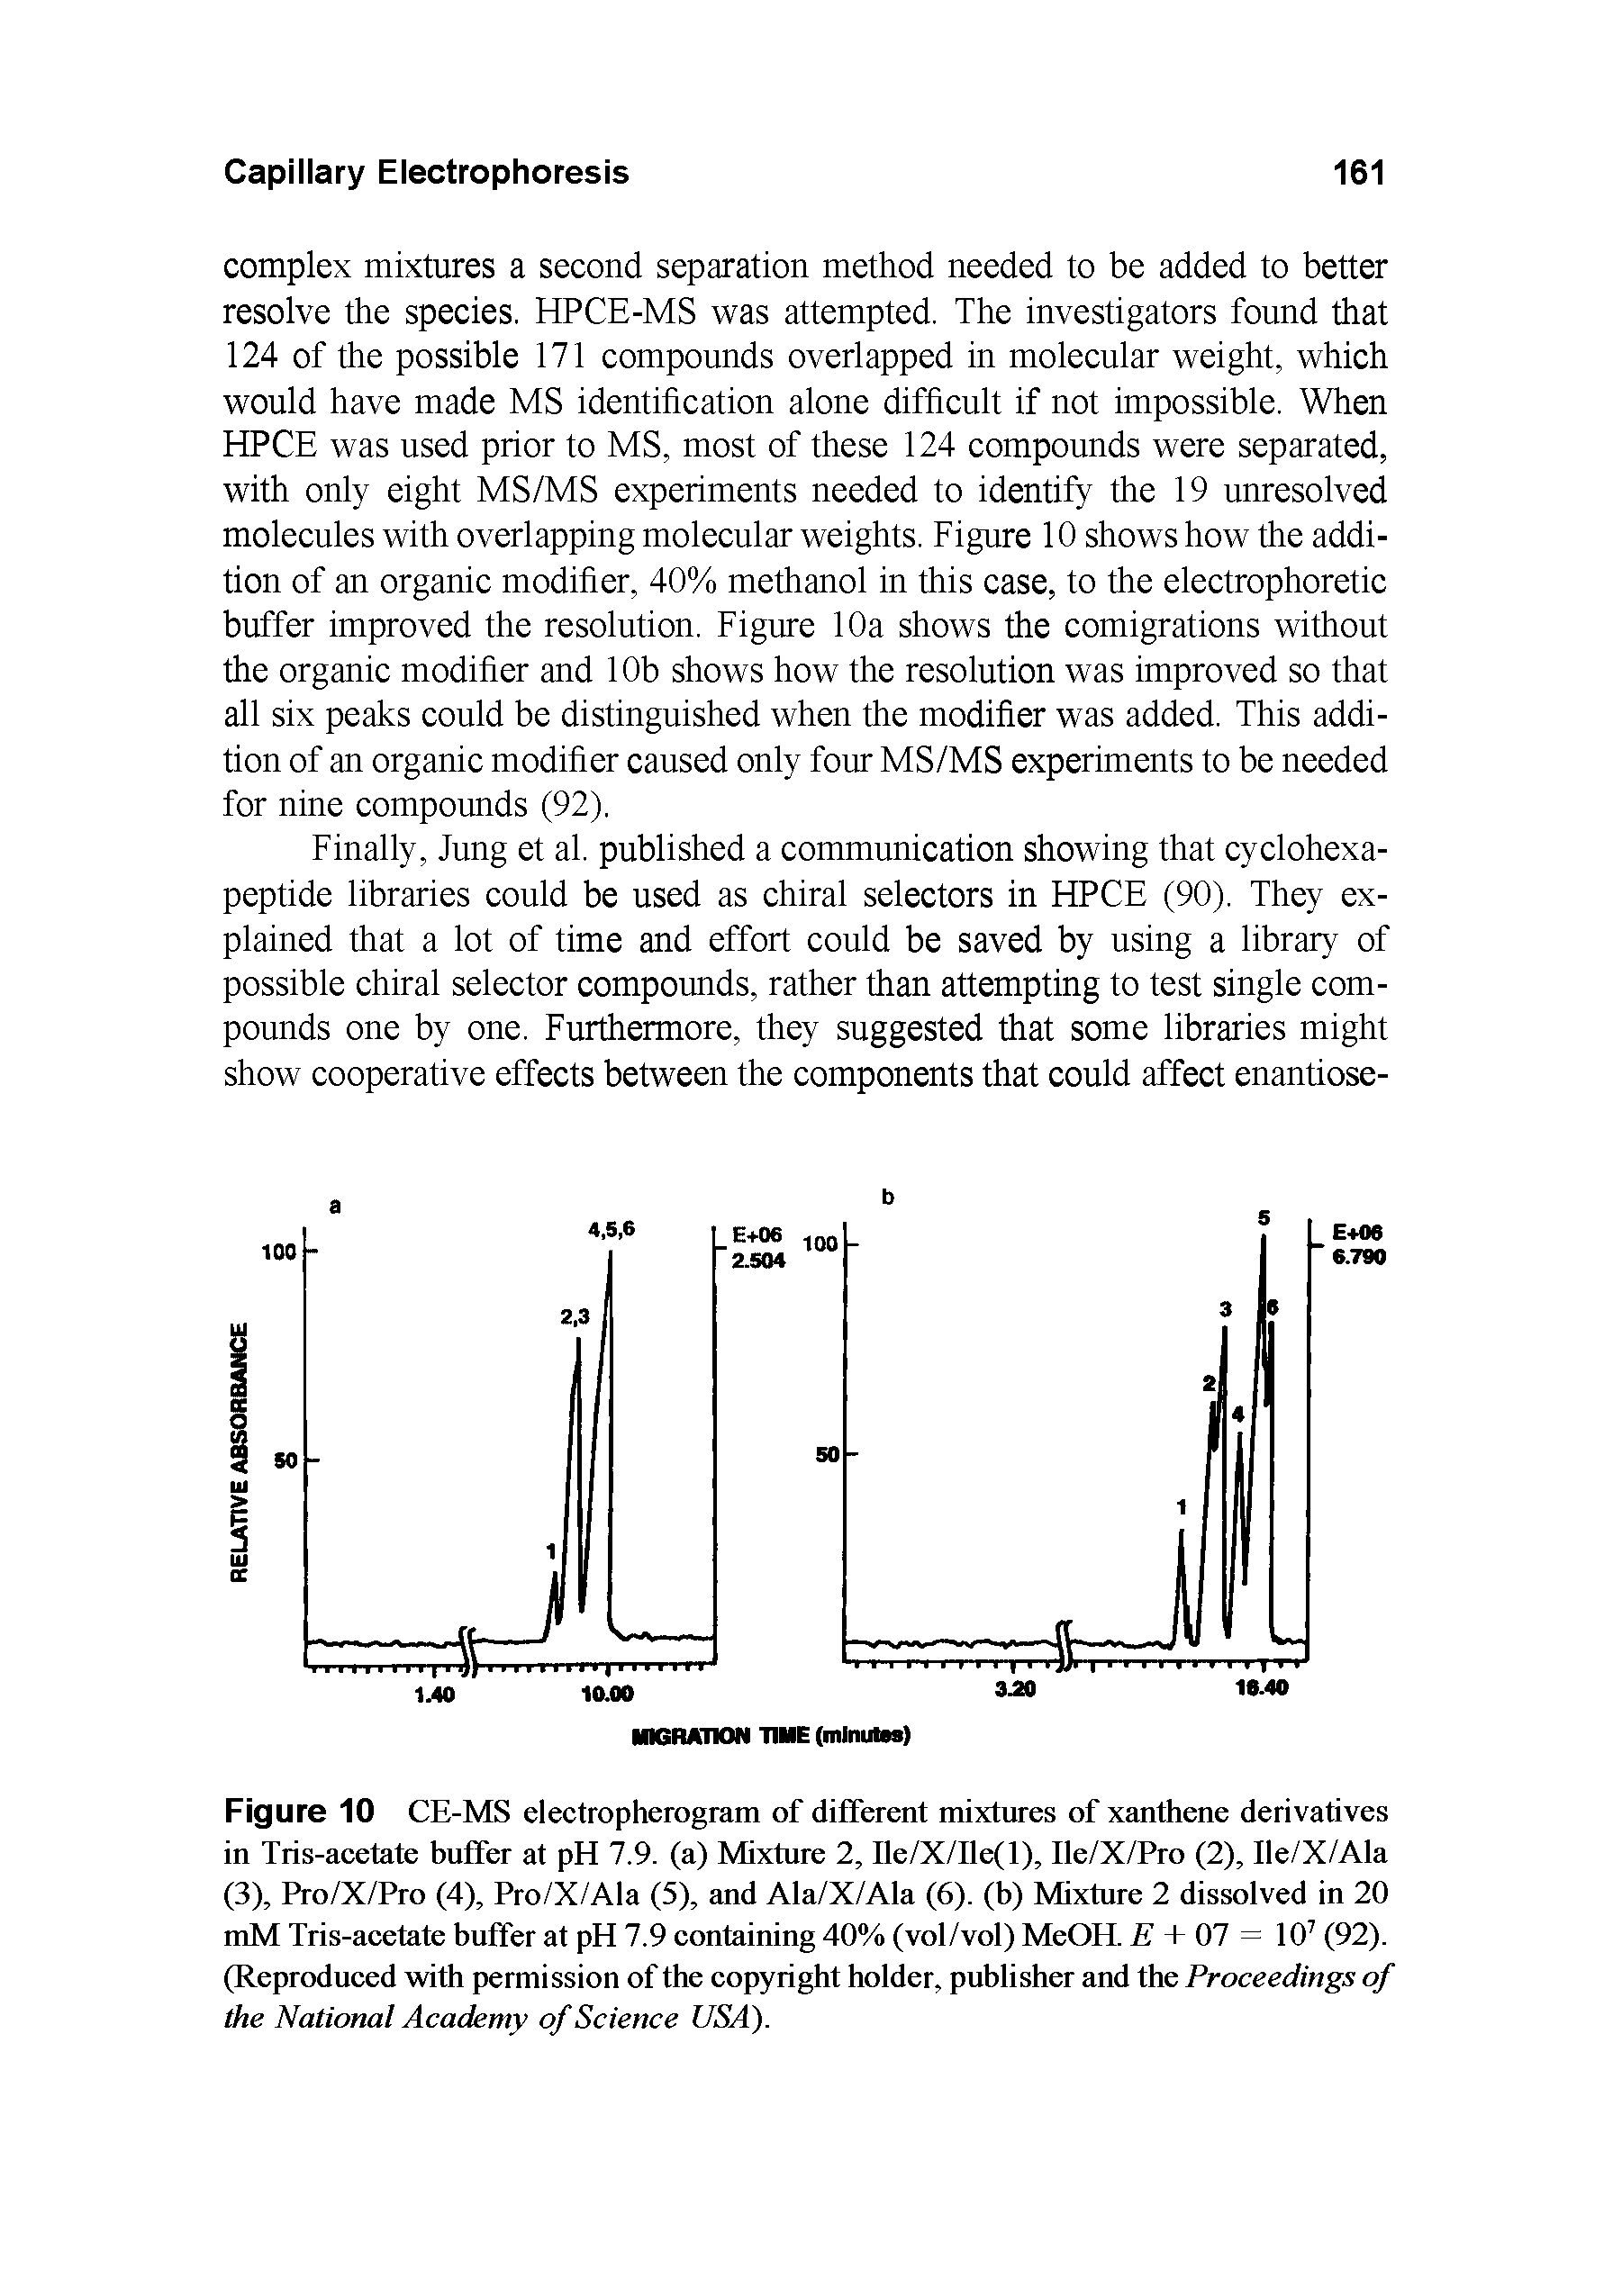 Figure 10 CE-MS electropherogram of different mixtures of xanthene derivatives in Tris-acetate buffer at pH 7.9. (a) Mixture 2, Ile/X/Ile(l), Ile/X/Pro (2), Ile/X/Ala (3), Pro/X/Pro (4), Pro/X/Ala (5), and Ala/X/Ala (6). (b) Mixture 2 dissolved in 20 mM Tris-acetate buffer at pH 7.9 containing 40% (vol/vol) MeOH. E + 07 = 107 (92). (Reproduced with permission of the copyright holder, publisher and the Proceedings of the National Academy of Science USA).